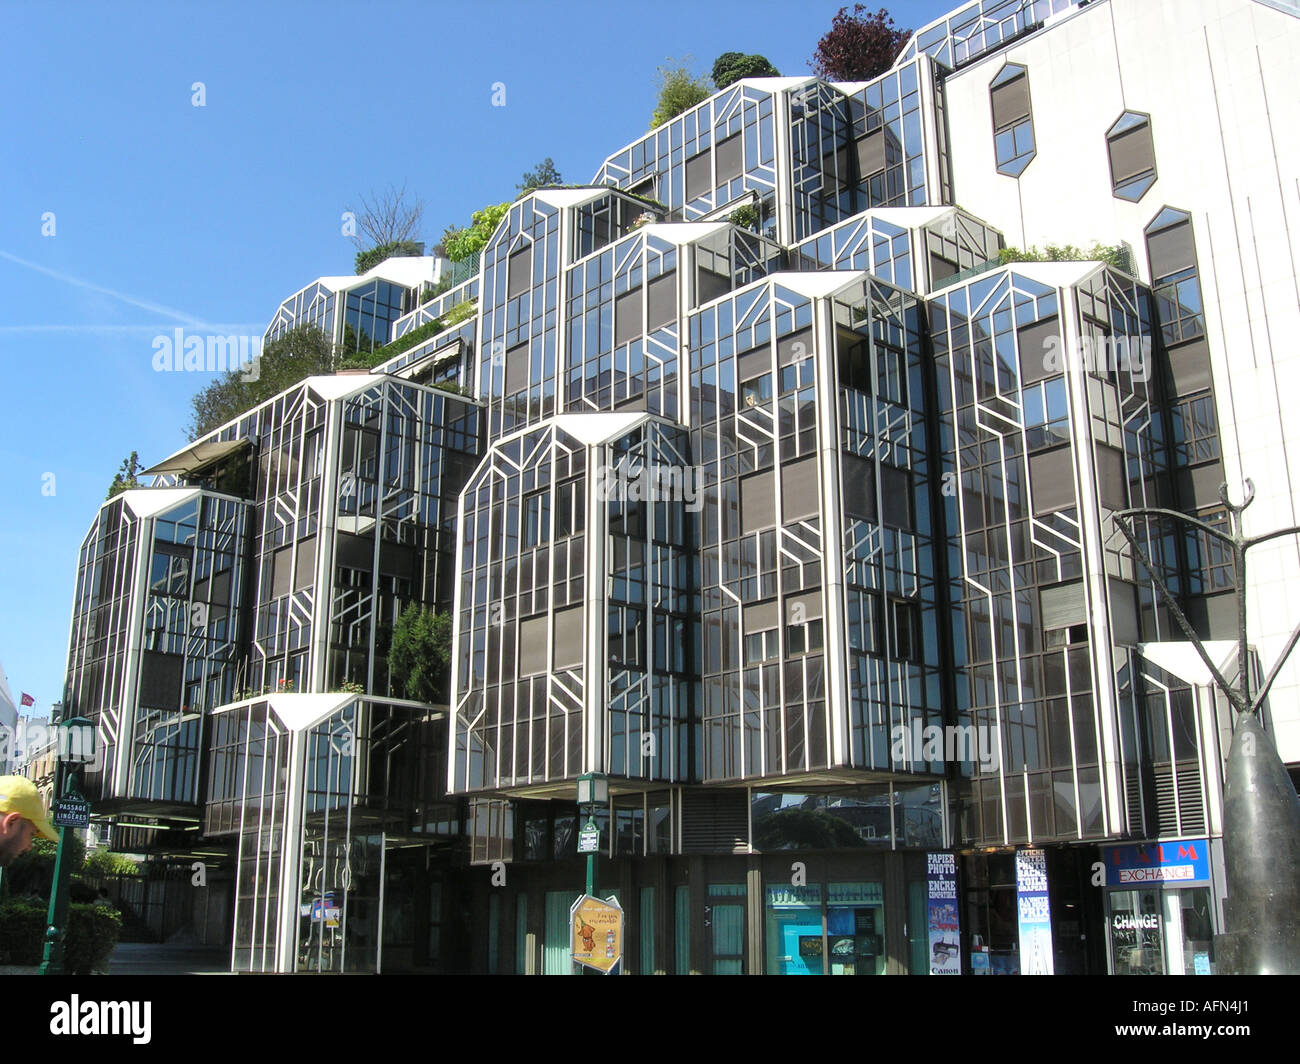 Architectural detail of apartment block near Forum des Halles Paris France with roof gardens and glass facade Stock Photo